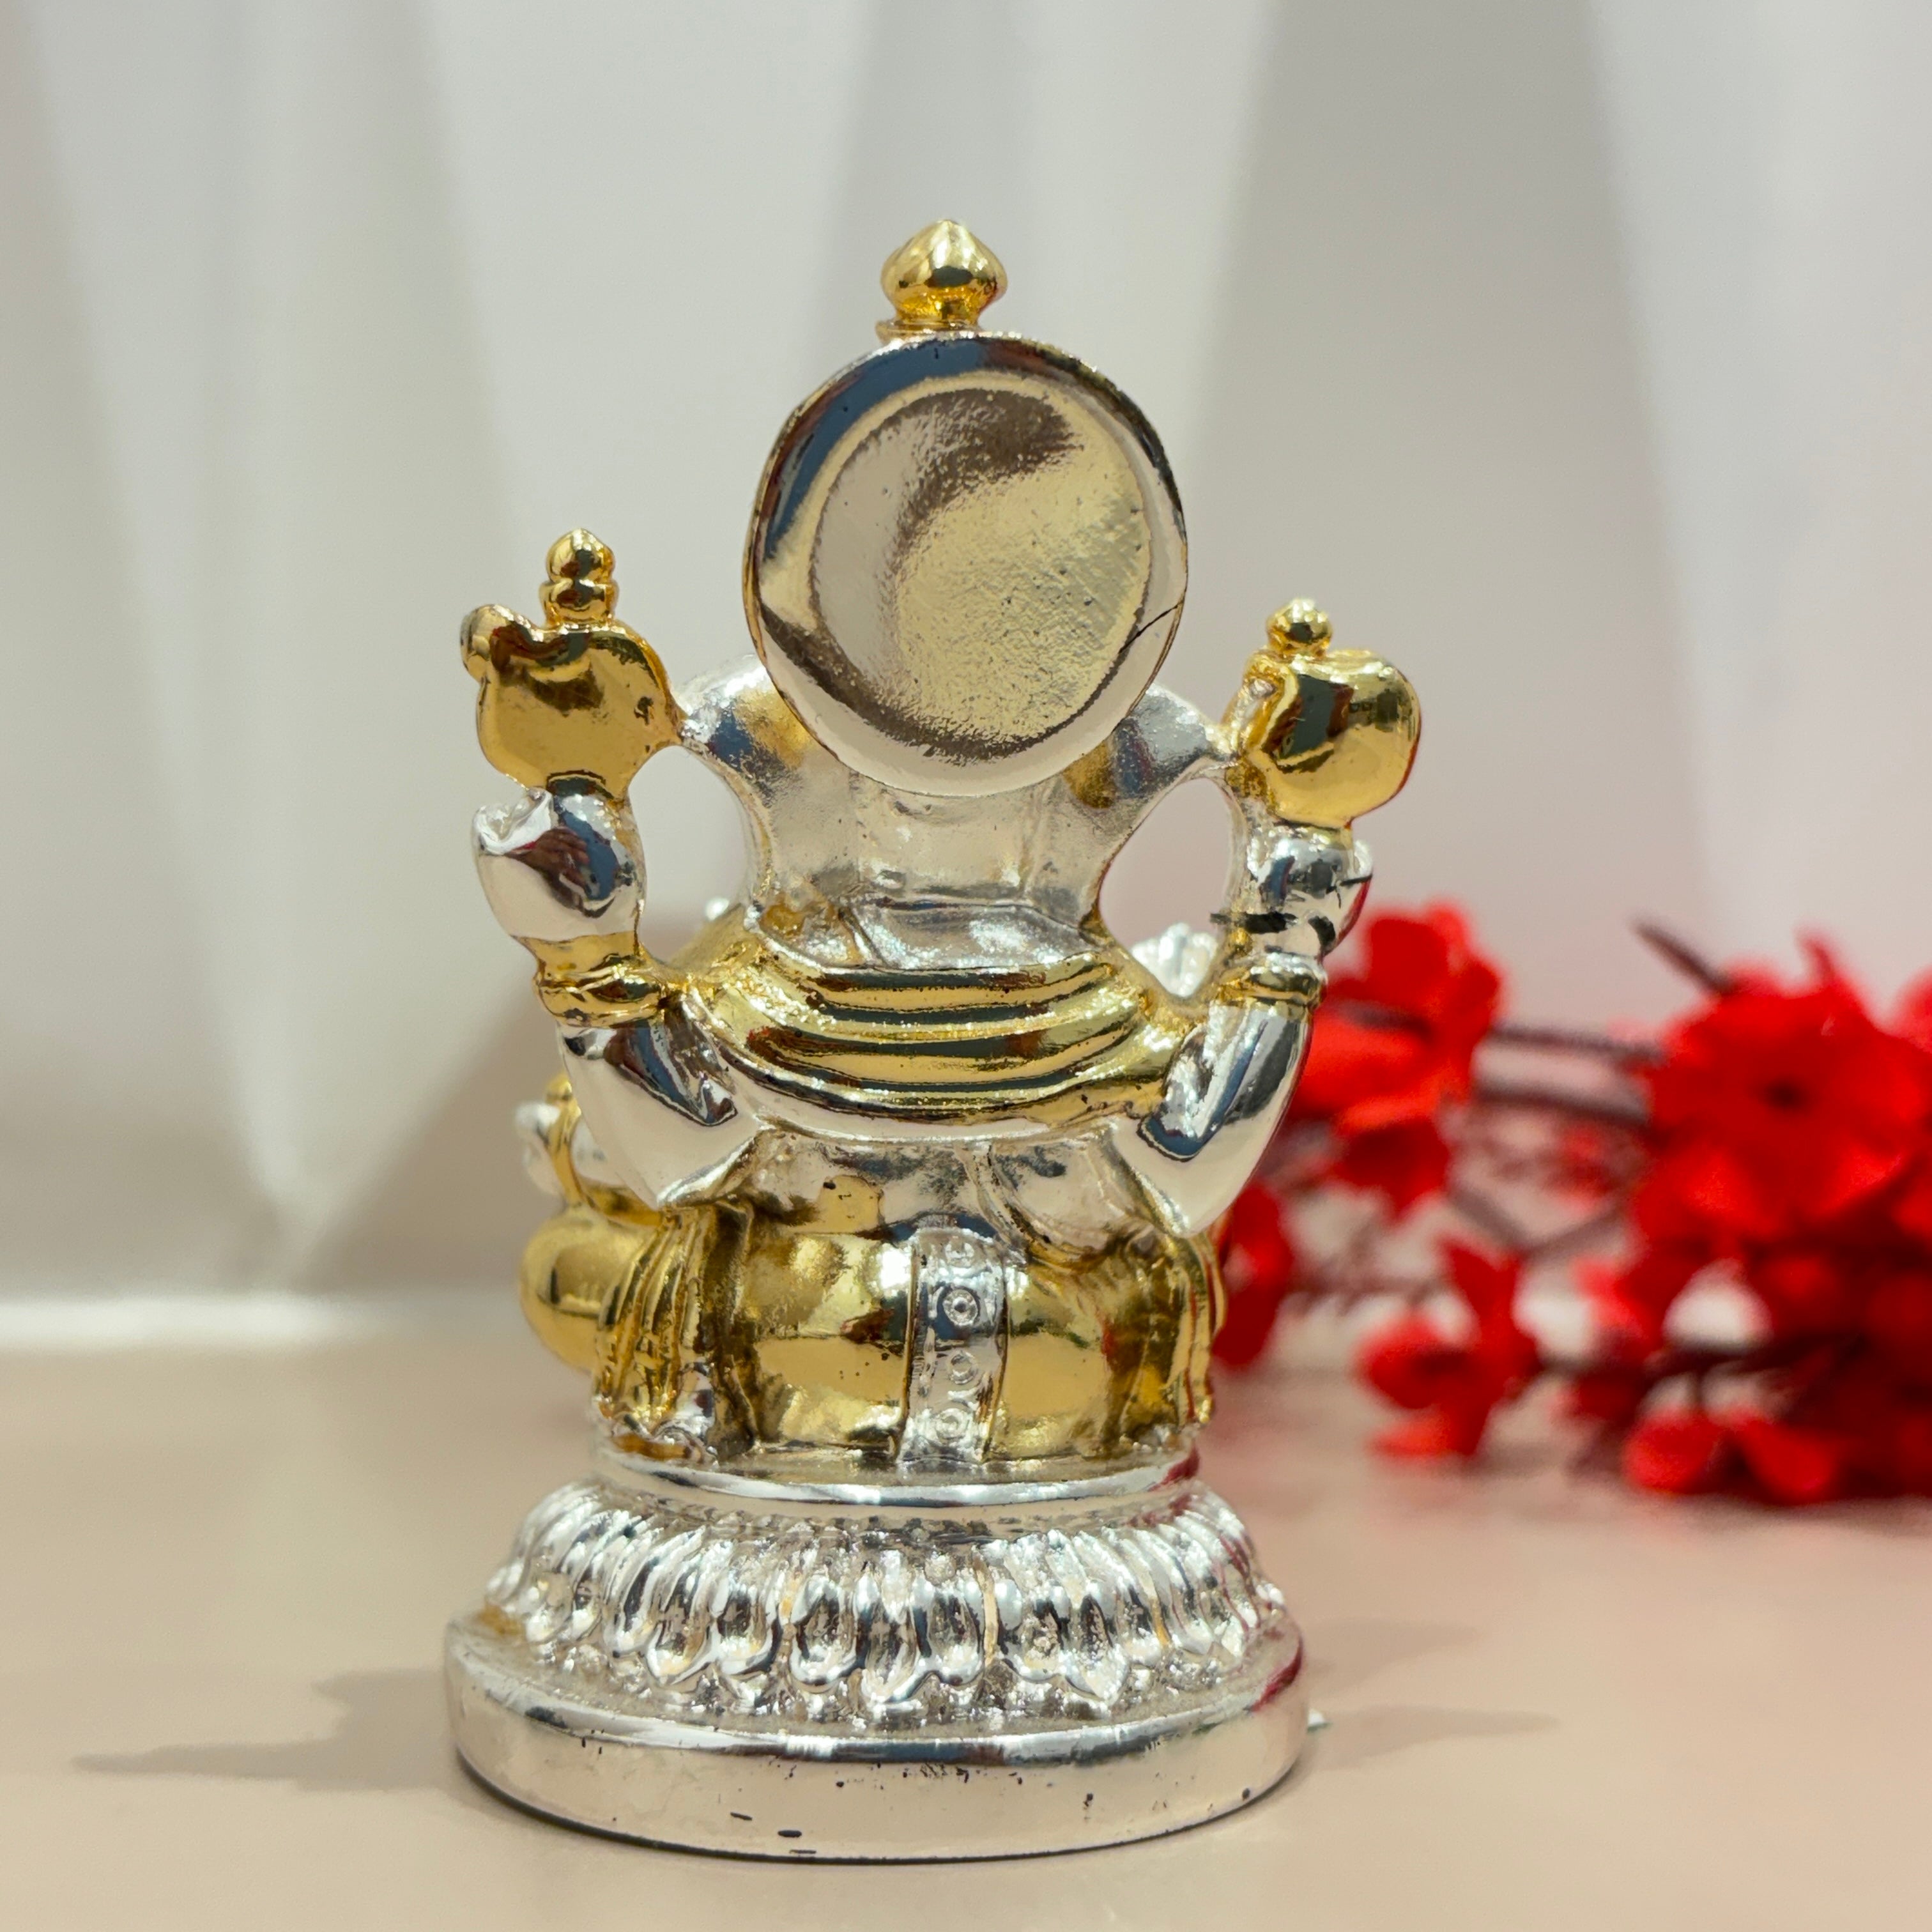 999 Gold Plated Ganesh Murti Sitting on Lotus for Home Decor